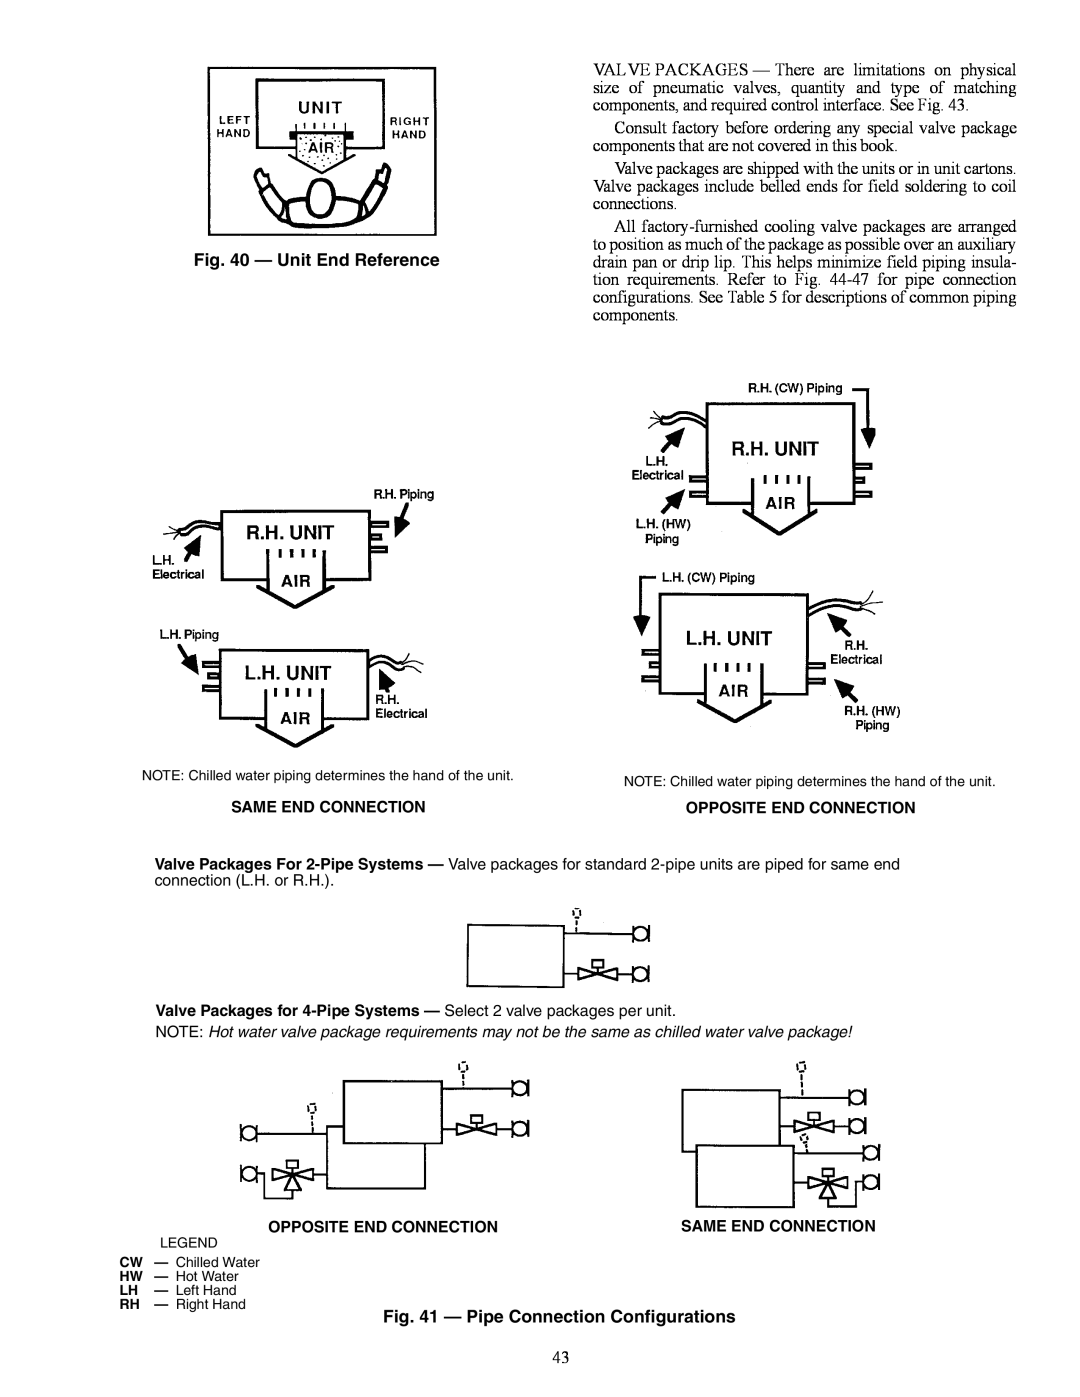 Carrier 42V, 42C, 42S, 42D specifications Pipe Connection Configurations 